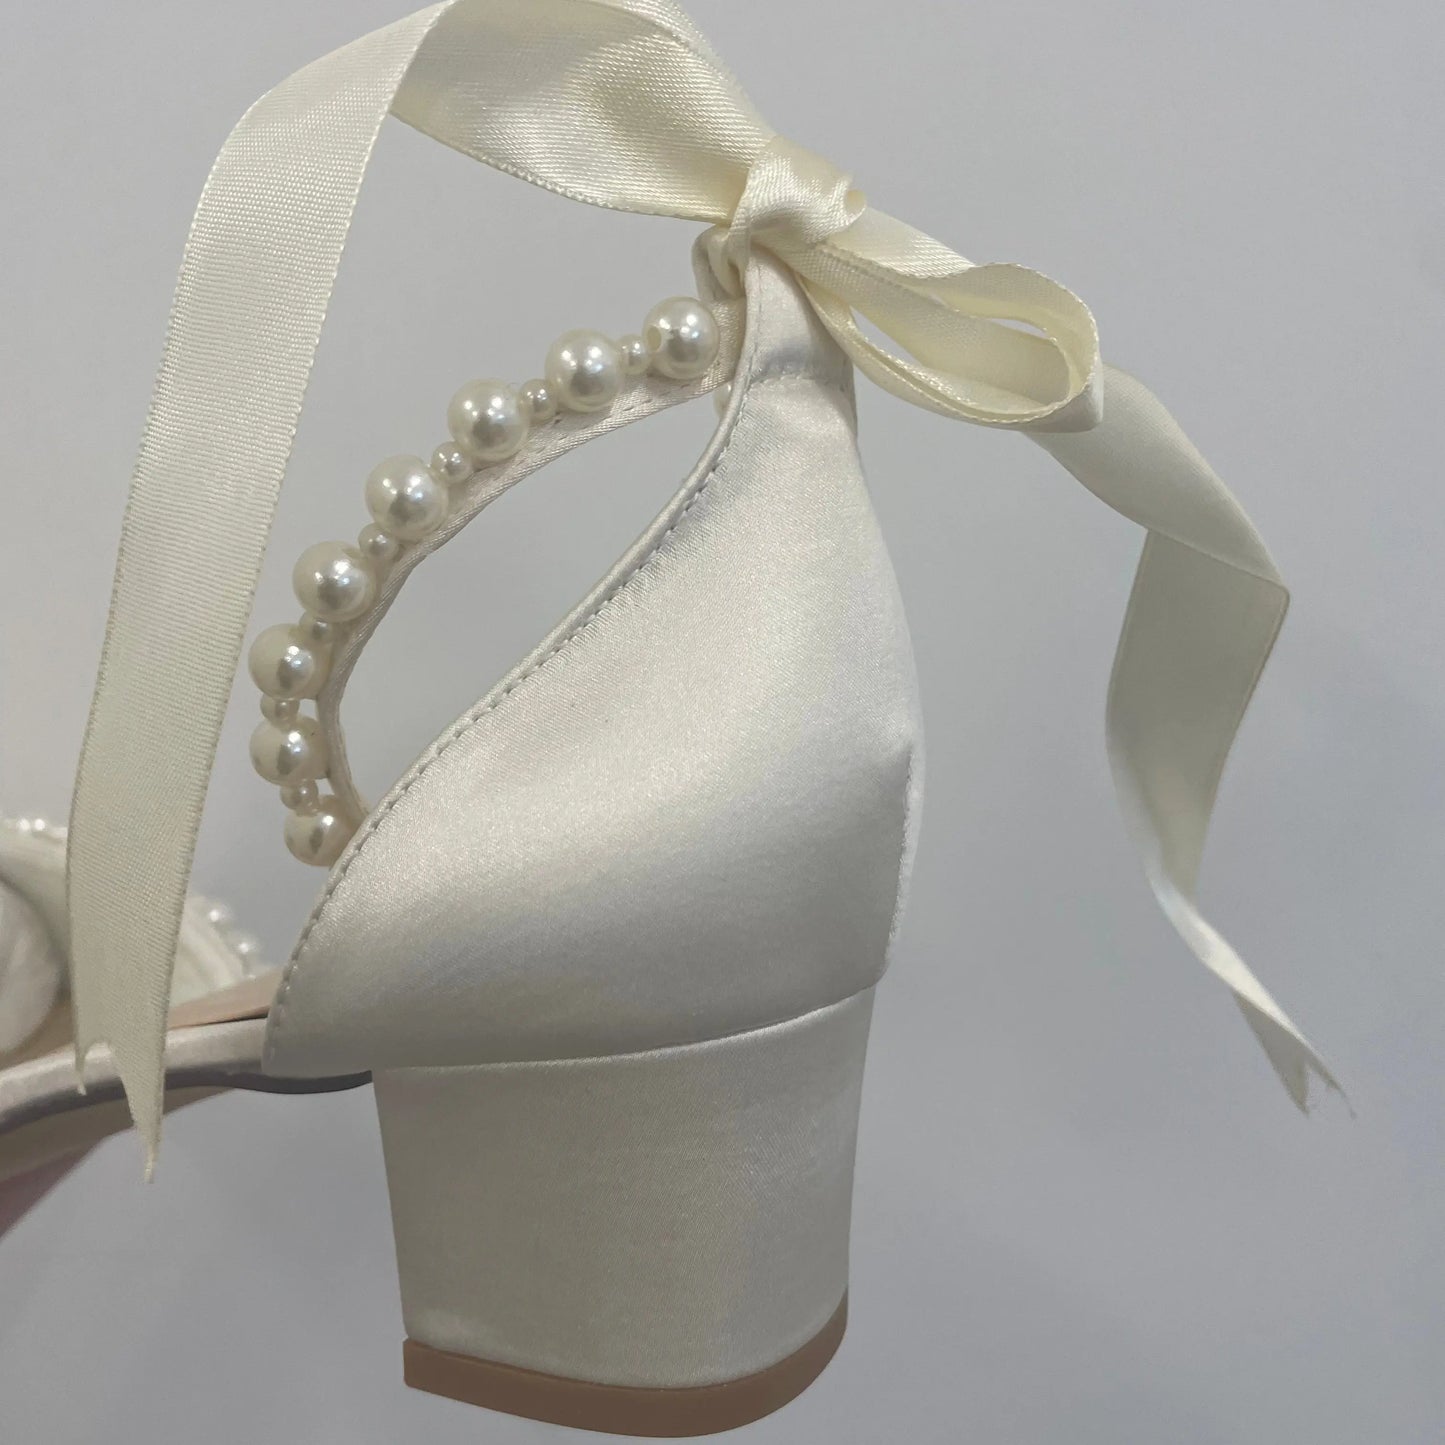 Dixie Bridal Shoe Different Heel View: View of the different heel showcasing the block heel design.